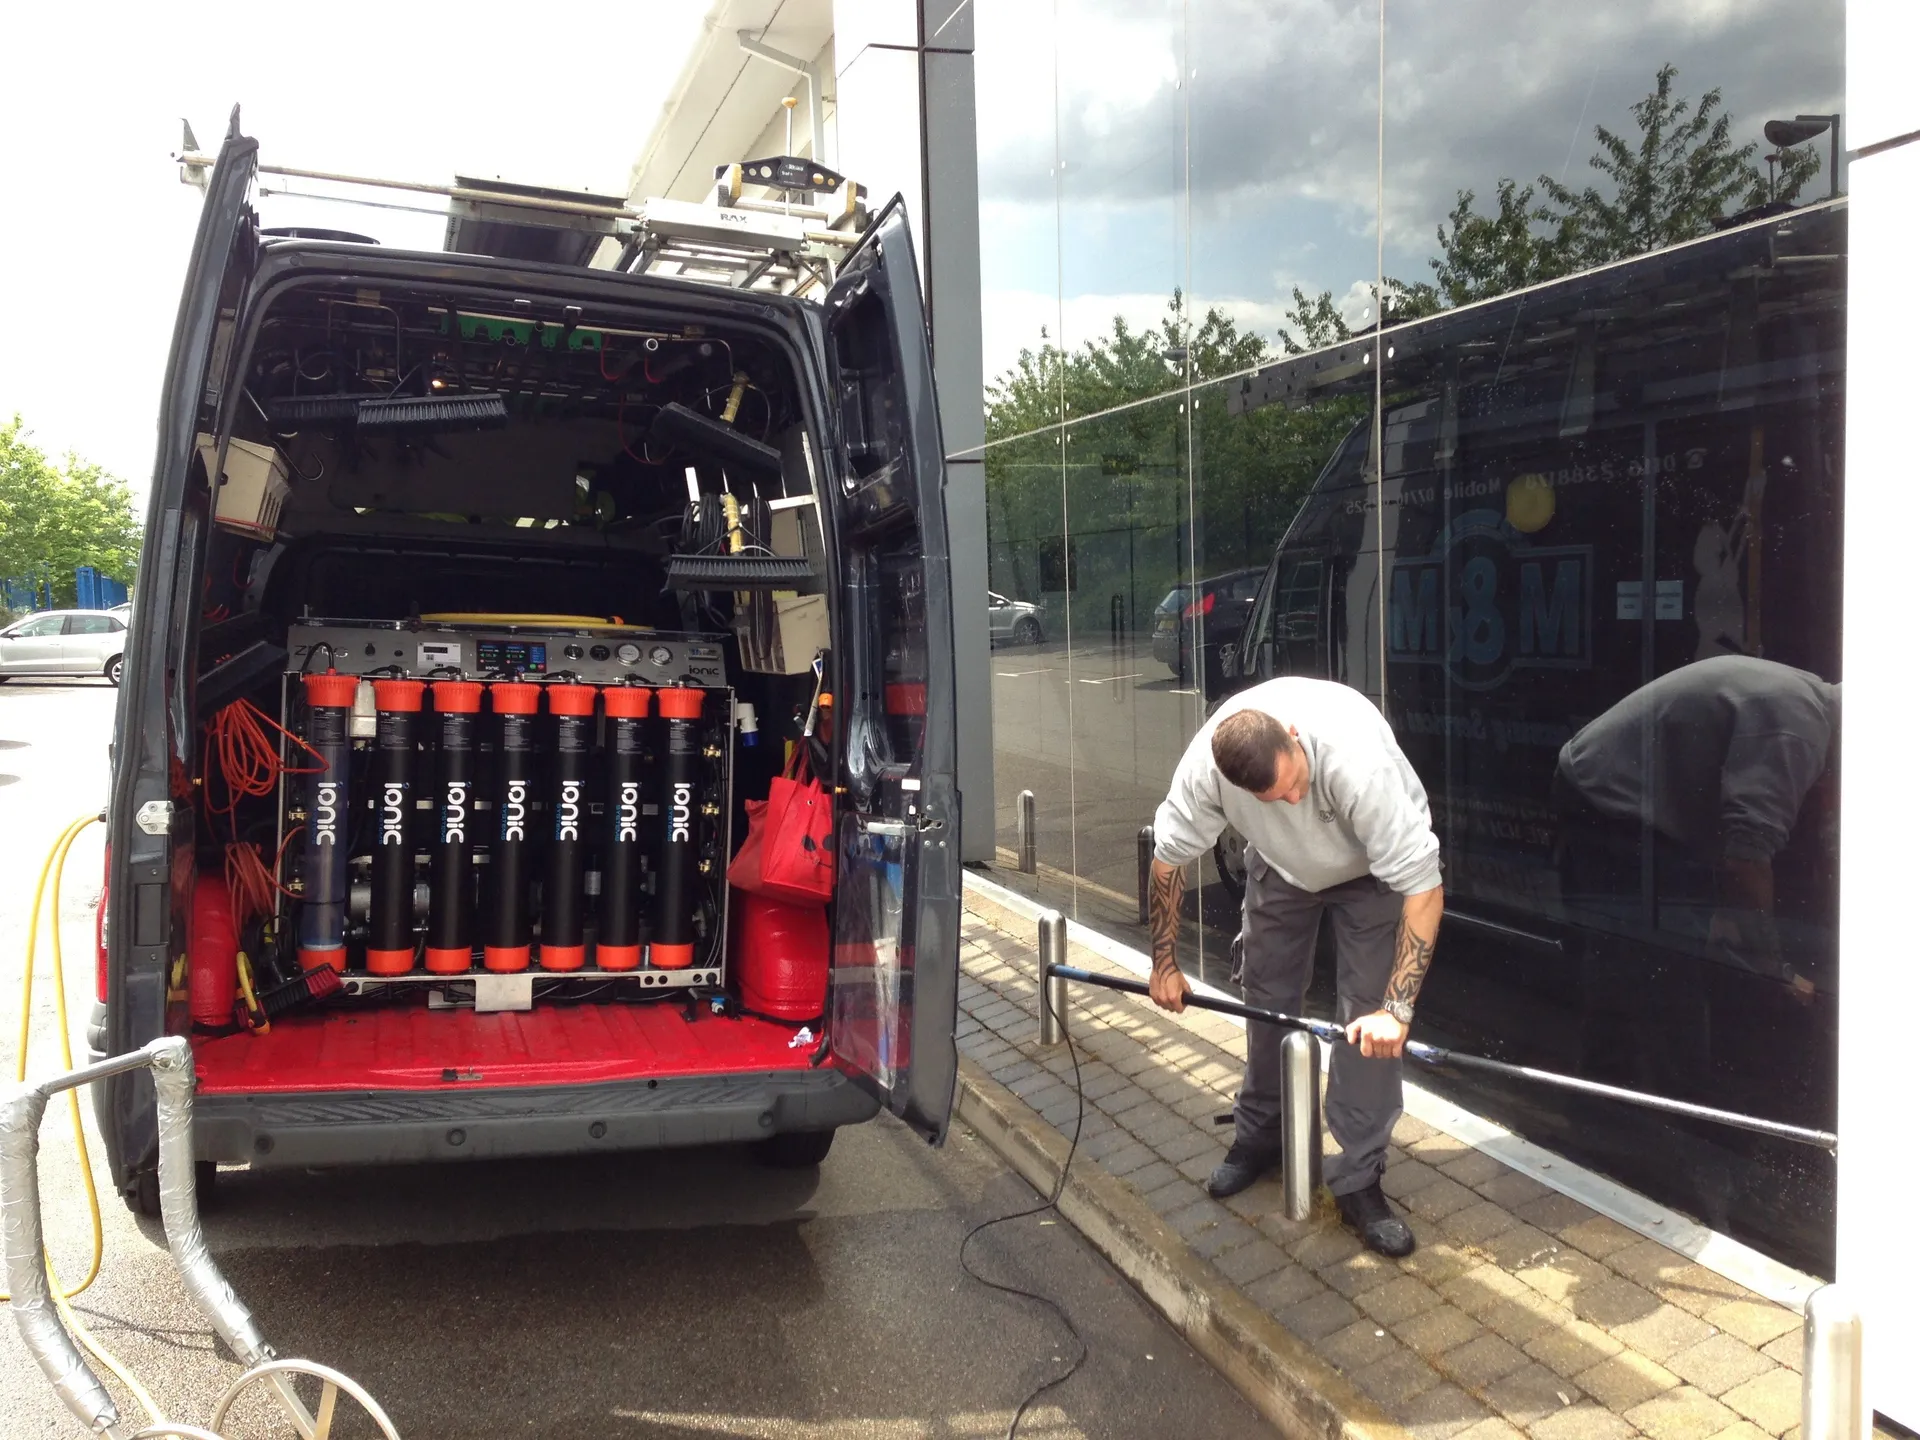 Ionic system in the back on van for cleaning windows